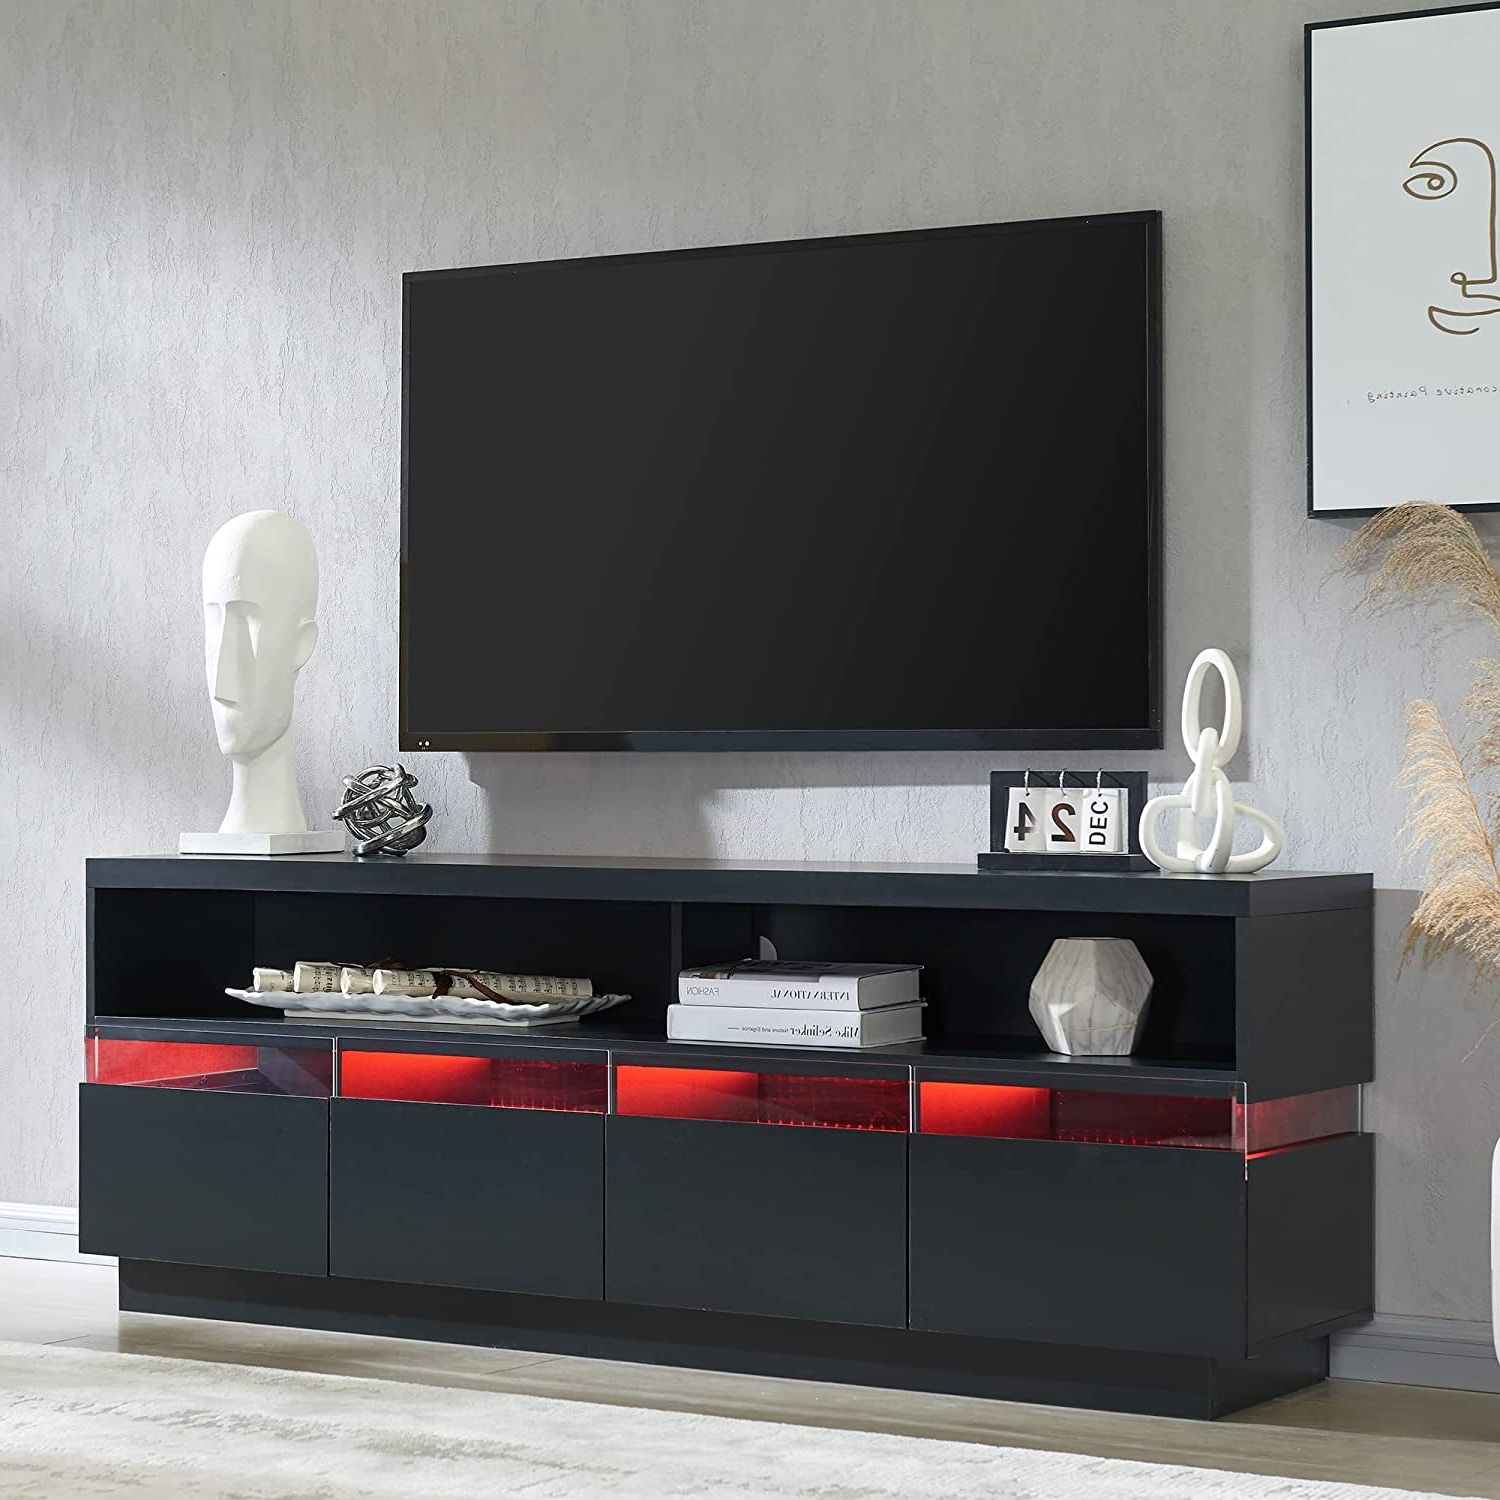 Okd Tv Stand For Tvs Up To 75", Entertainment Center, With Rgb Led Lights  And Storage Shelves For Living Room,solid Black – Walmart Regarding Black Rgb Entertainment Centers (View 7 of 20)